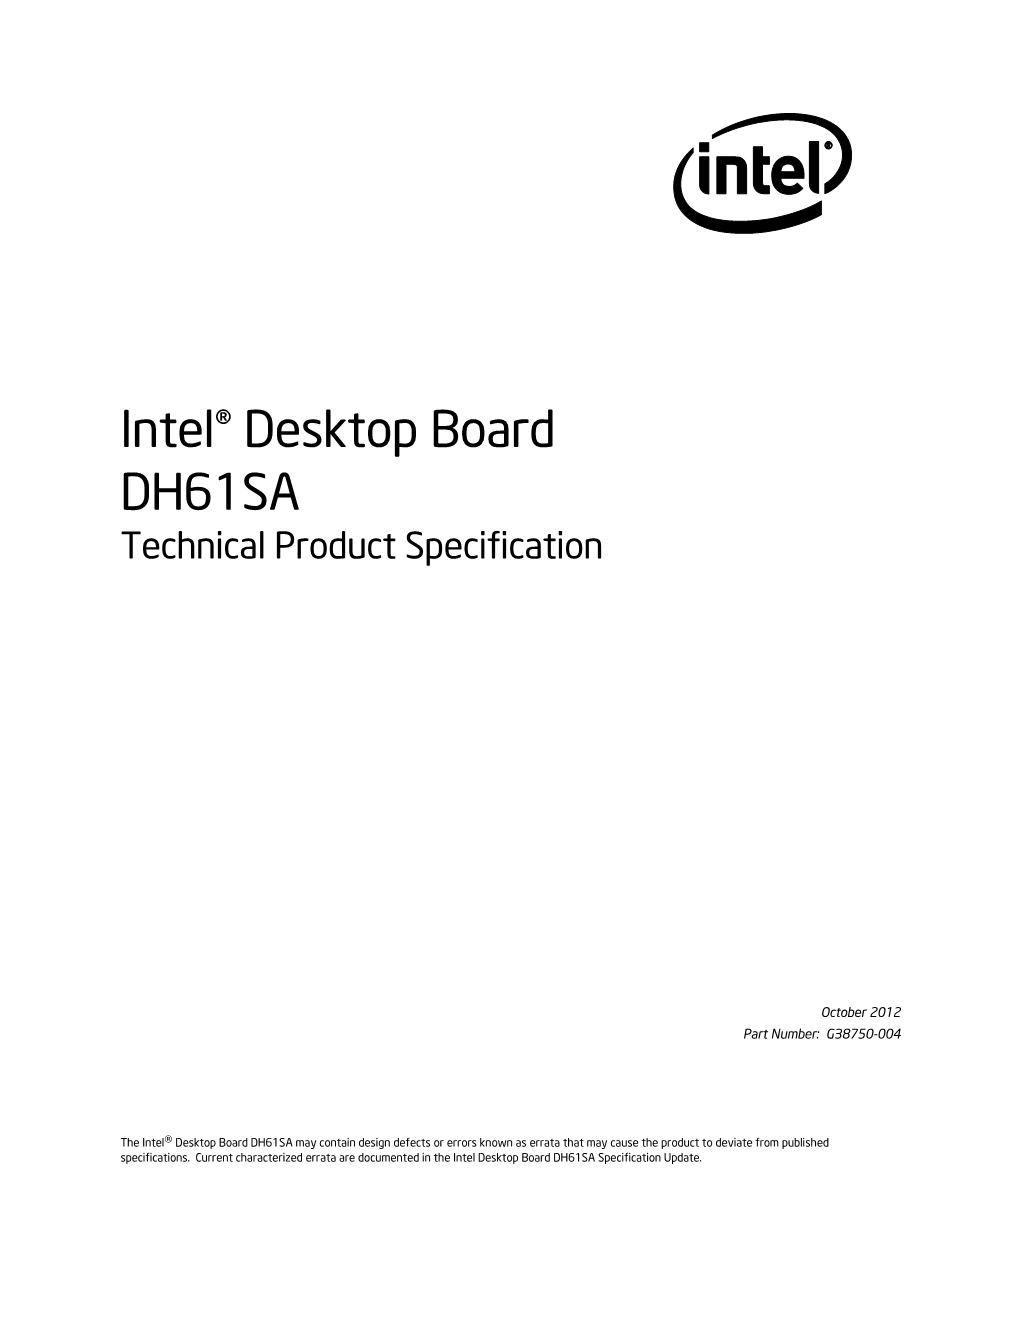 Intel® Desktop Board DH61SA Technical Product Specification